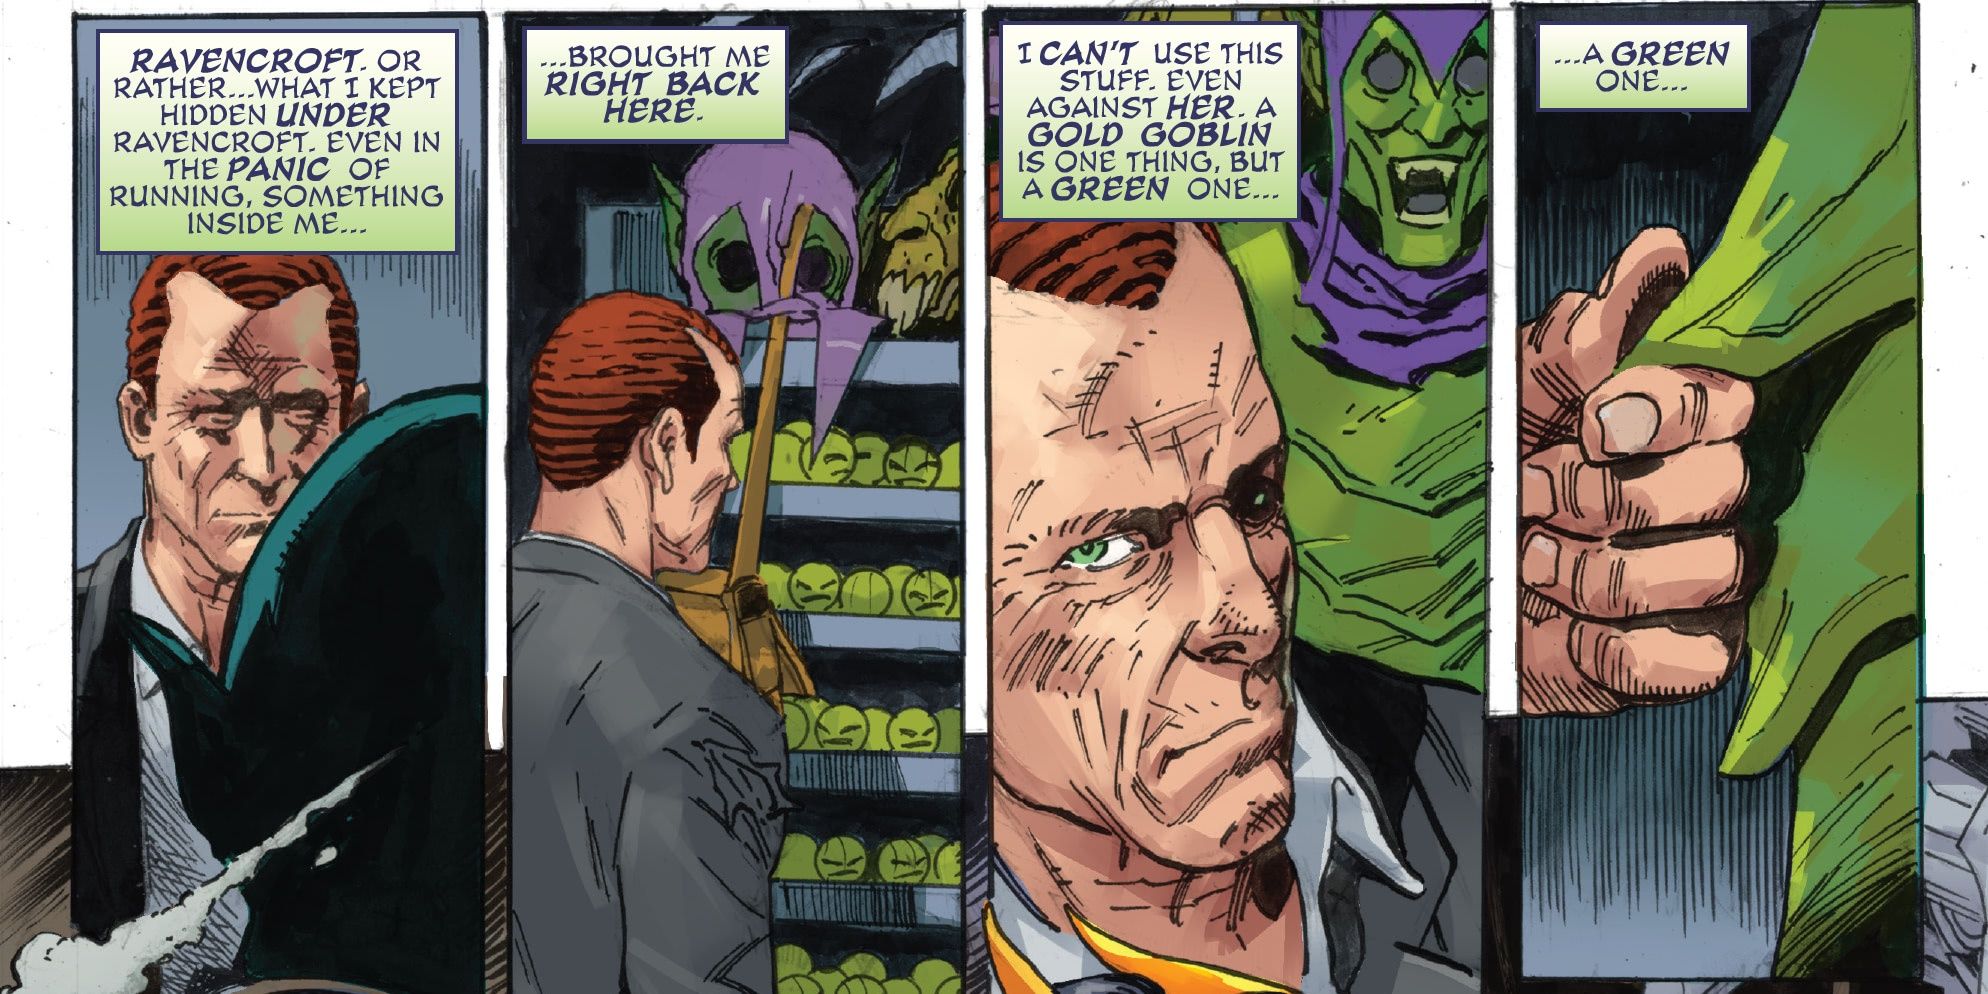 Norman Osborn is tempted by his Green Goblin suit in Gold Goblin #5 in Marvel Comics